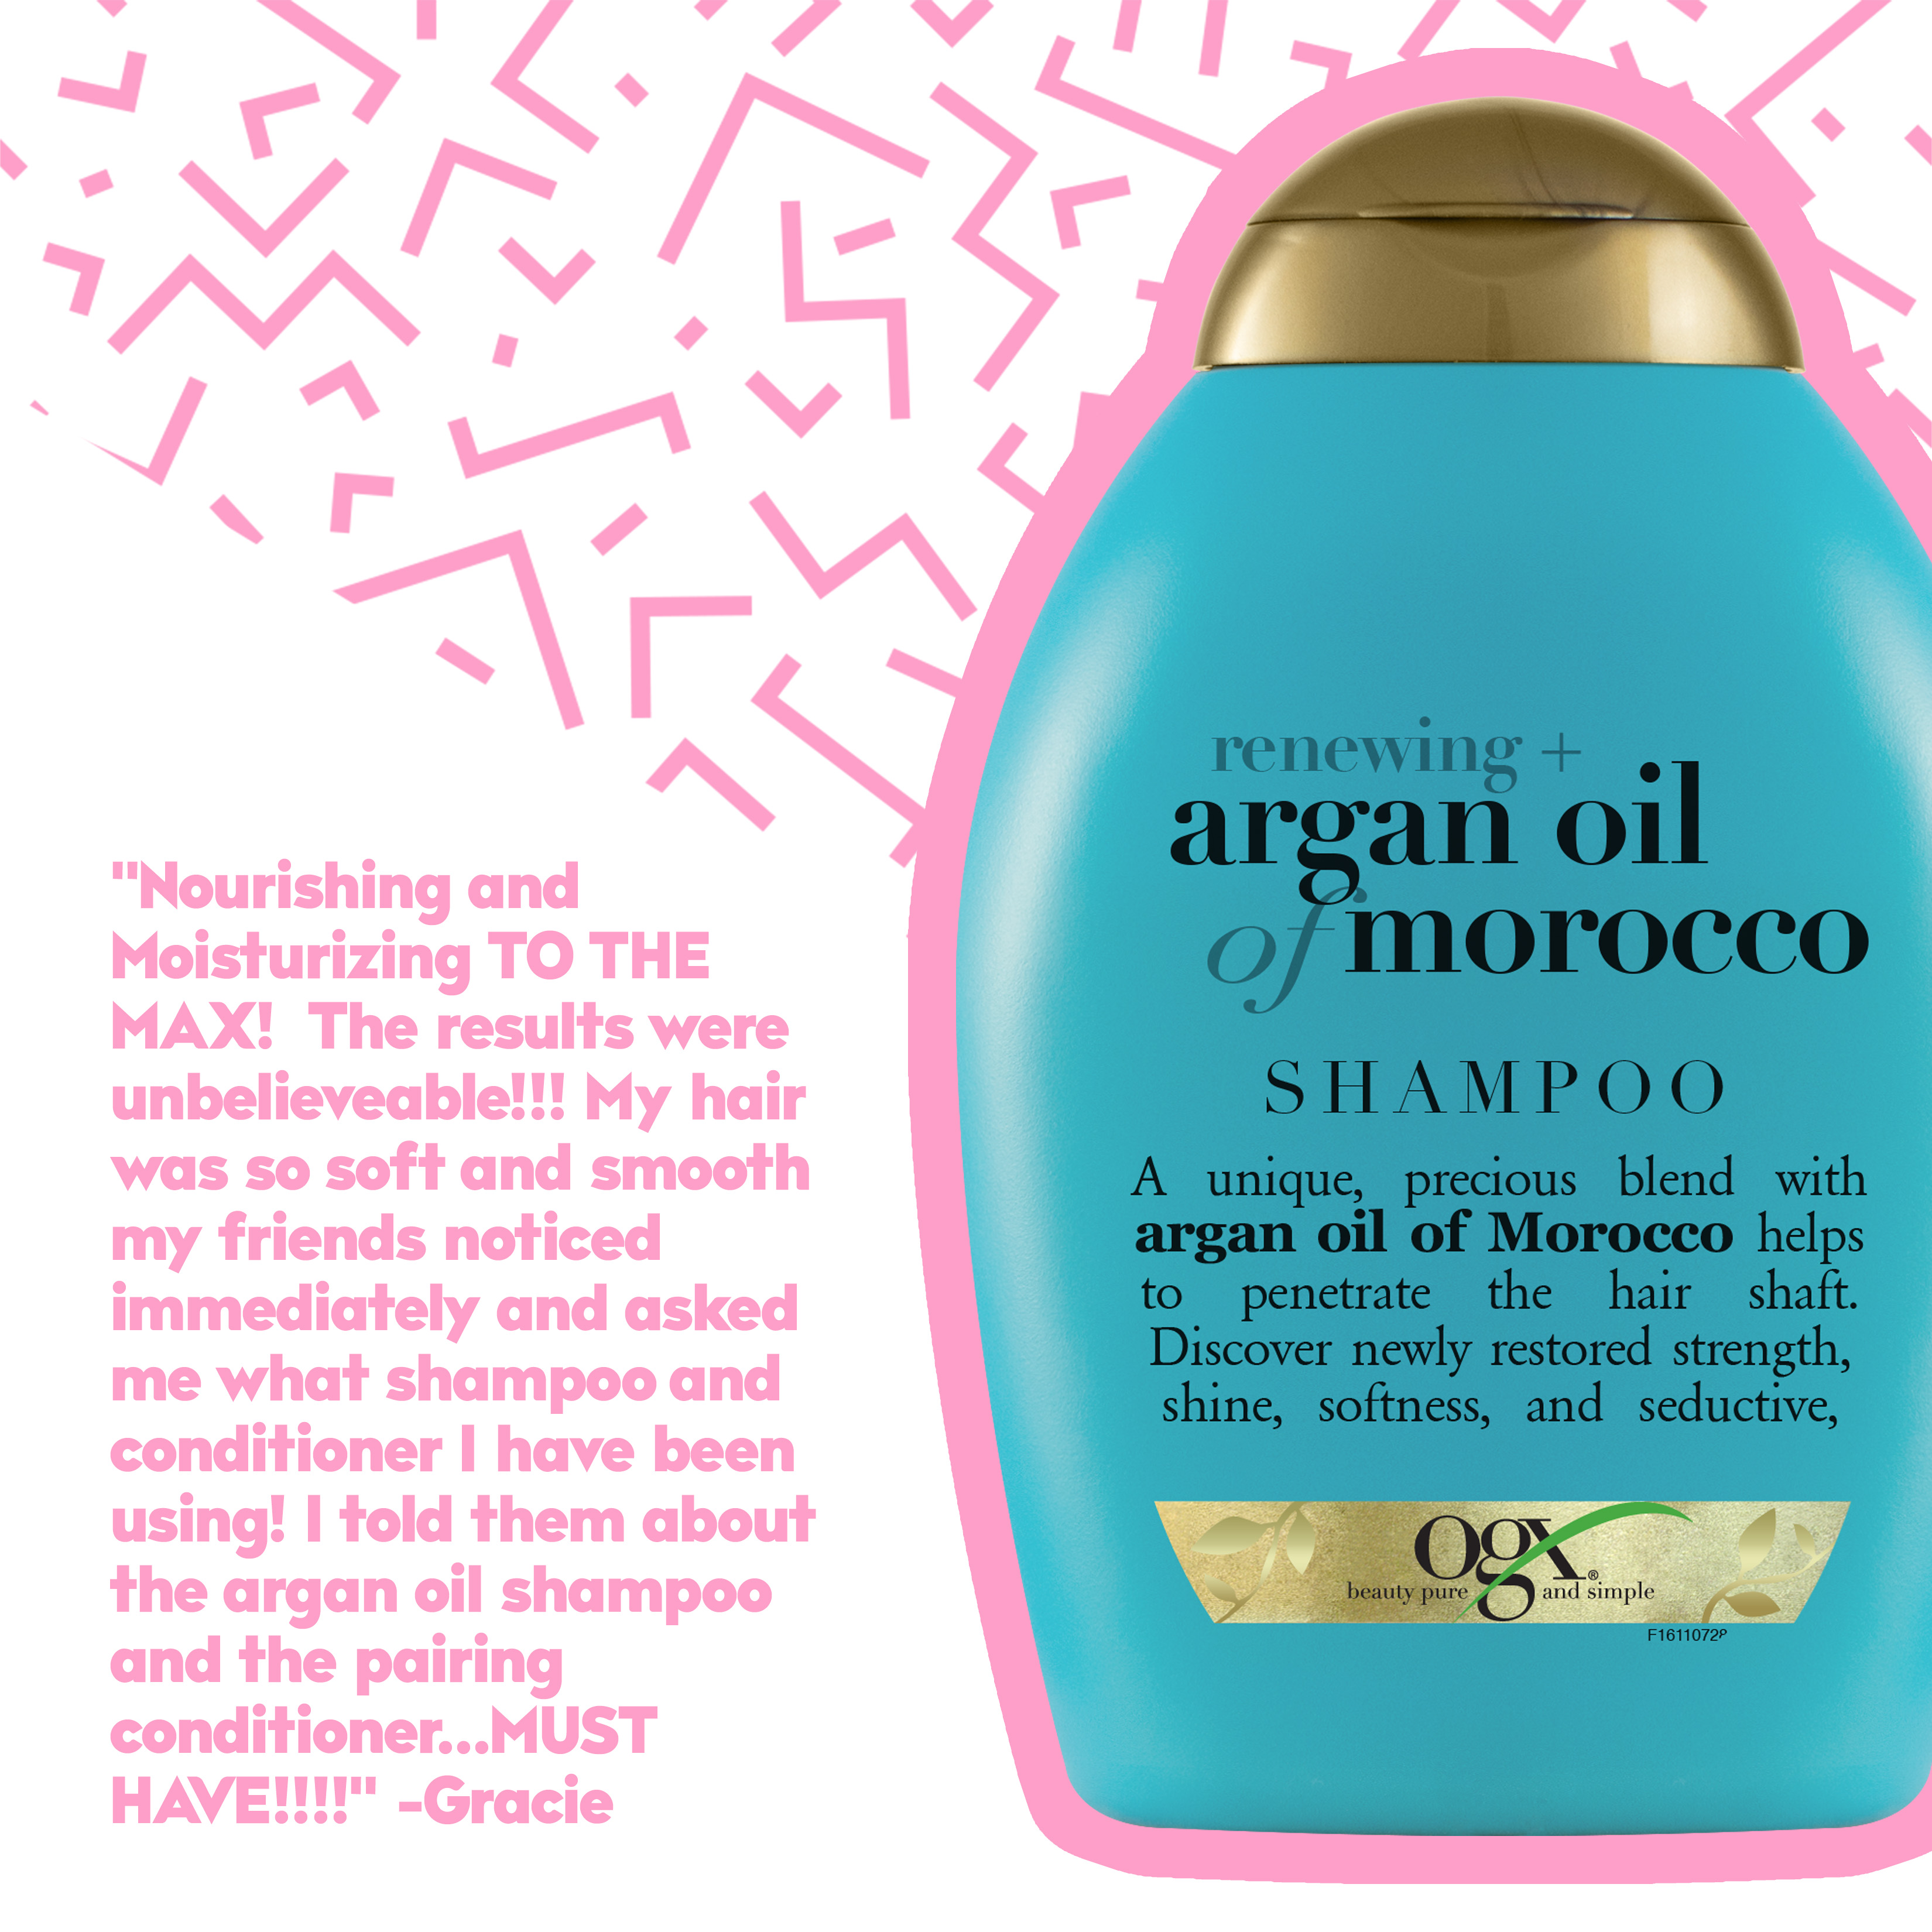 OGX Renewing + Argan Oil of Morocco Hydrating Hair Shampoo, Cold-Pressed Argan Oil to Help Moisturize, Soften & Strengthen Hair, Paraben-Free with Sulfate-Free Surfactants, 13 fl. Oz - 2 Pack - image 2 of 3